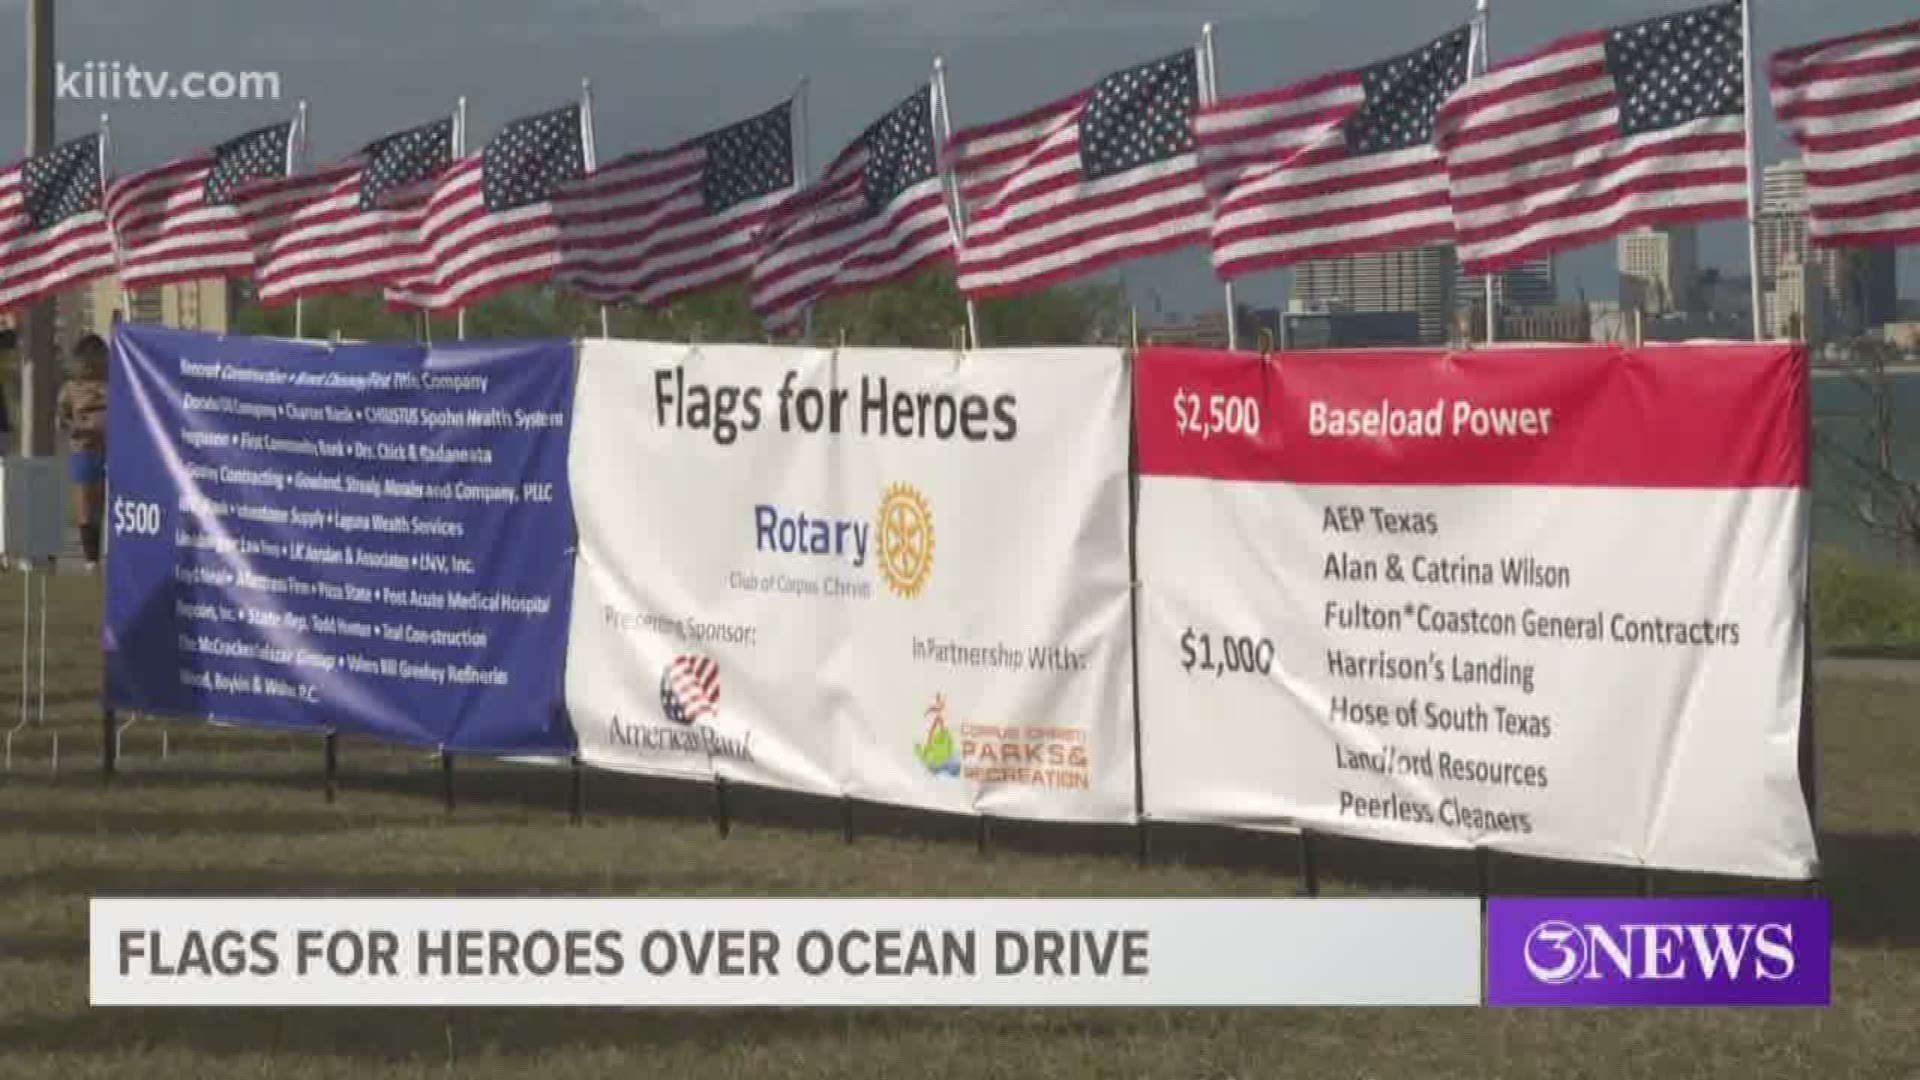 Over 50 volunteers and the Corpus Christi Rotary Club put out a thousand flags on display along Ocean Drive to remember and honor our veterans on their special day.